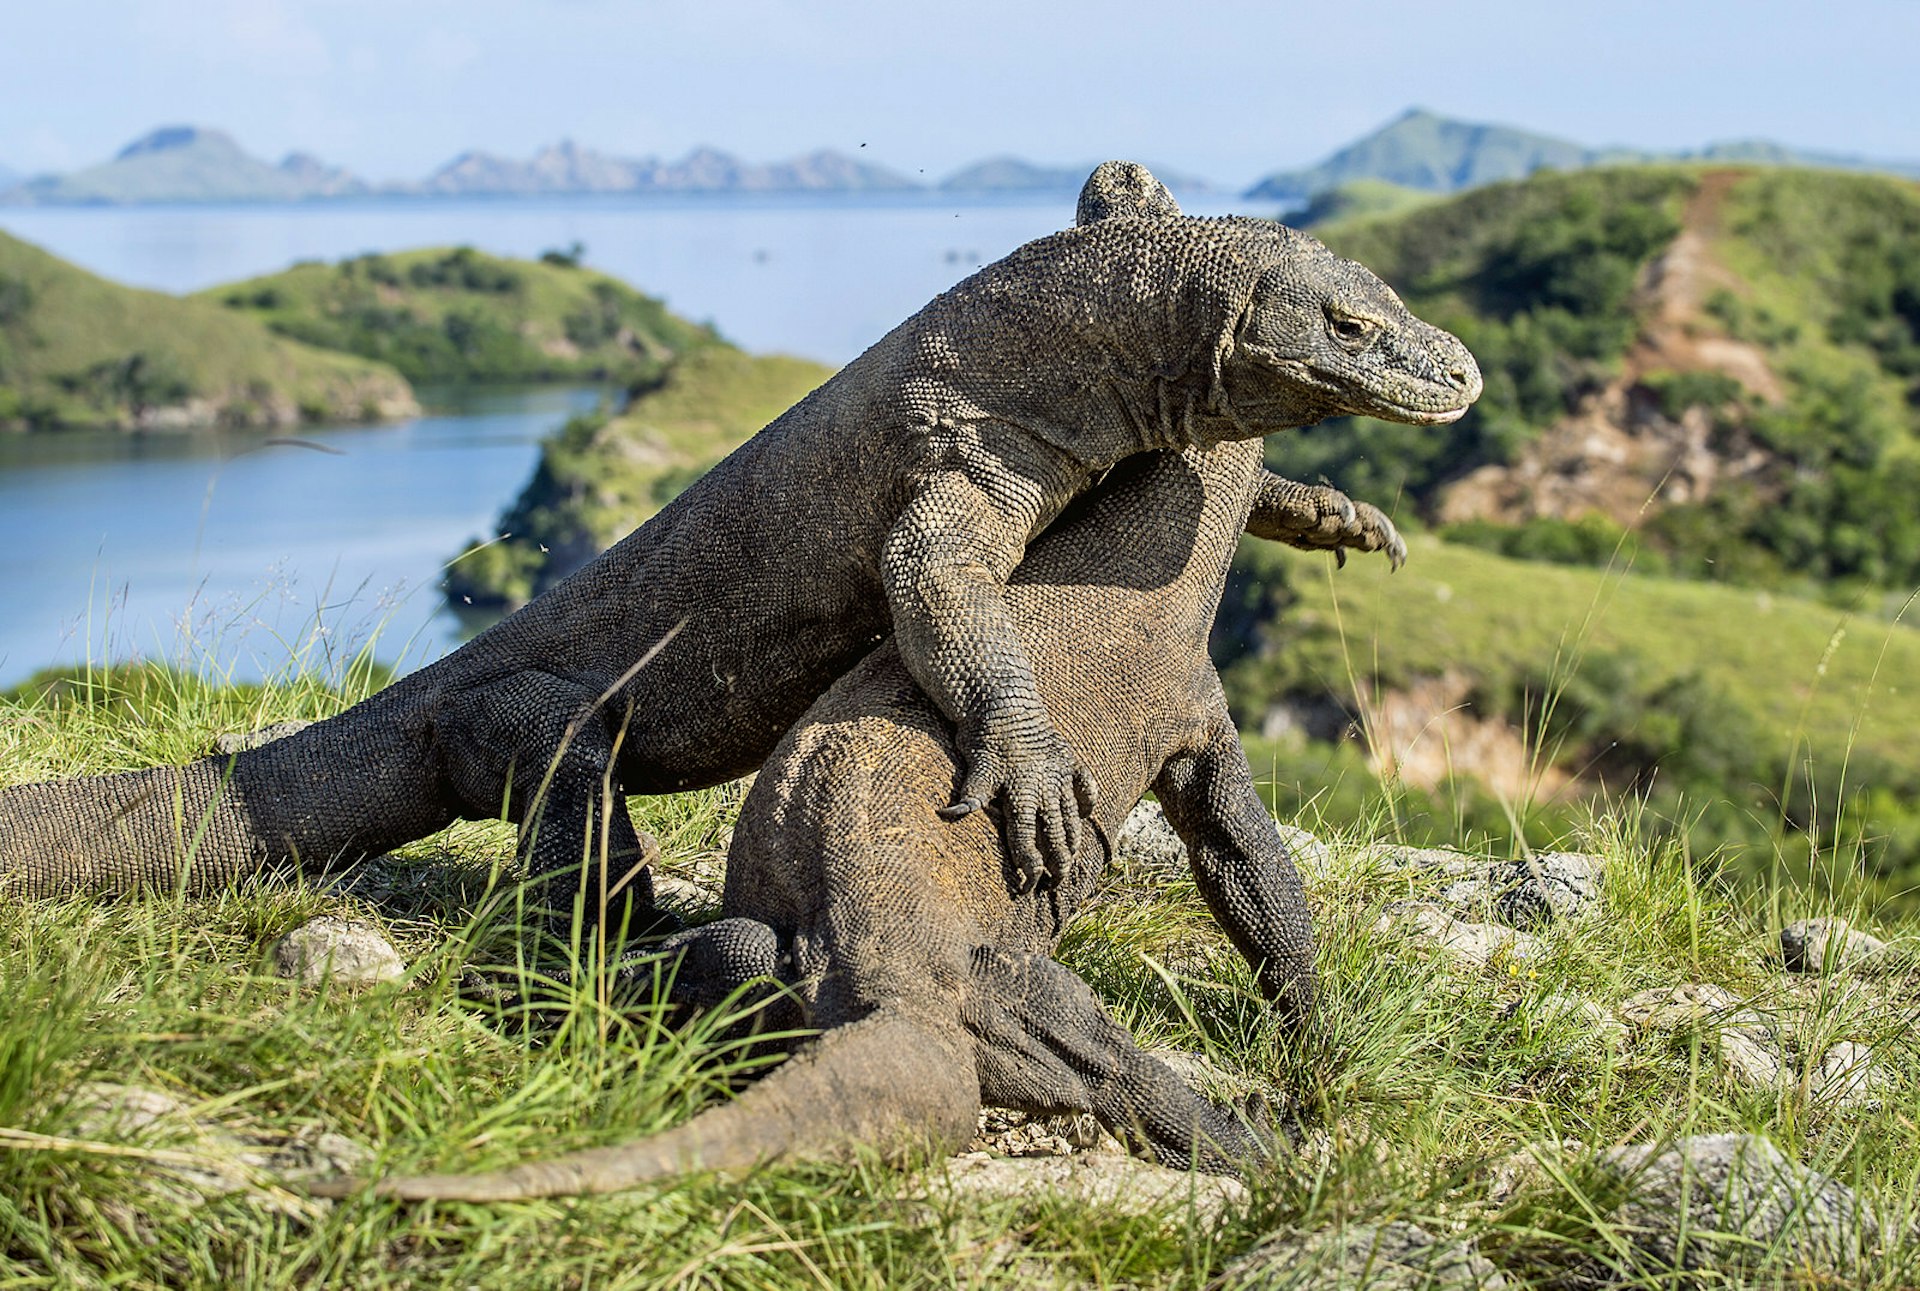 A pair of Komodo dragons wrestling for supremacy on Komodo, Indonesia © USO / Getty Images